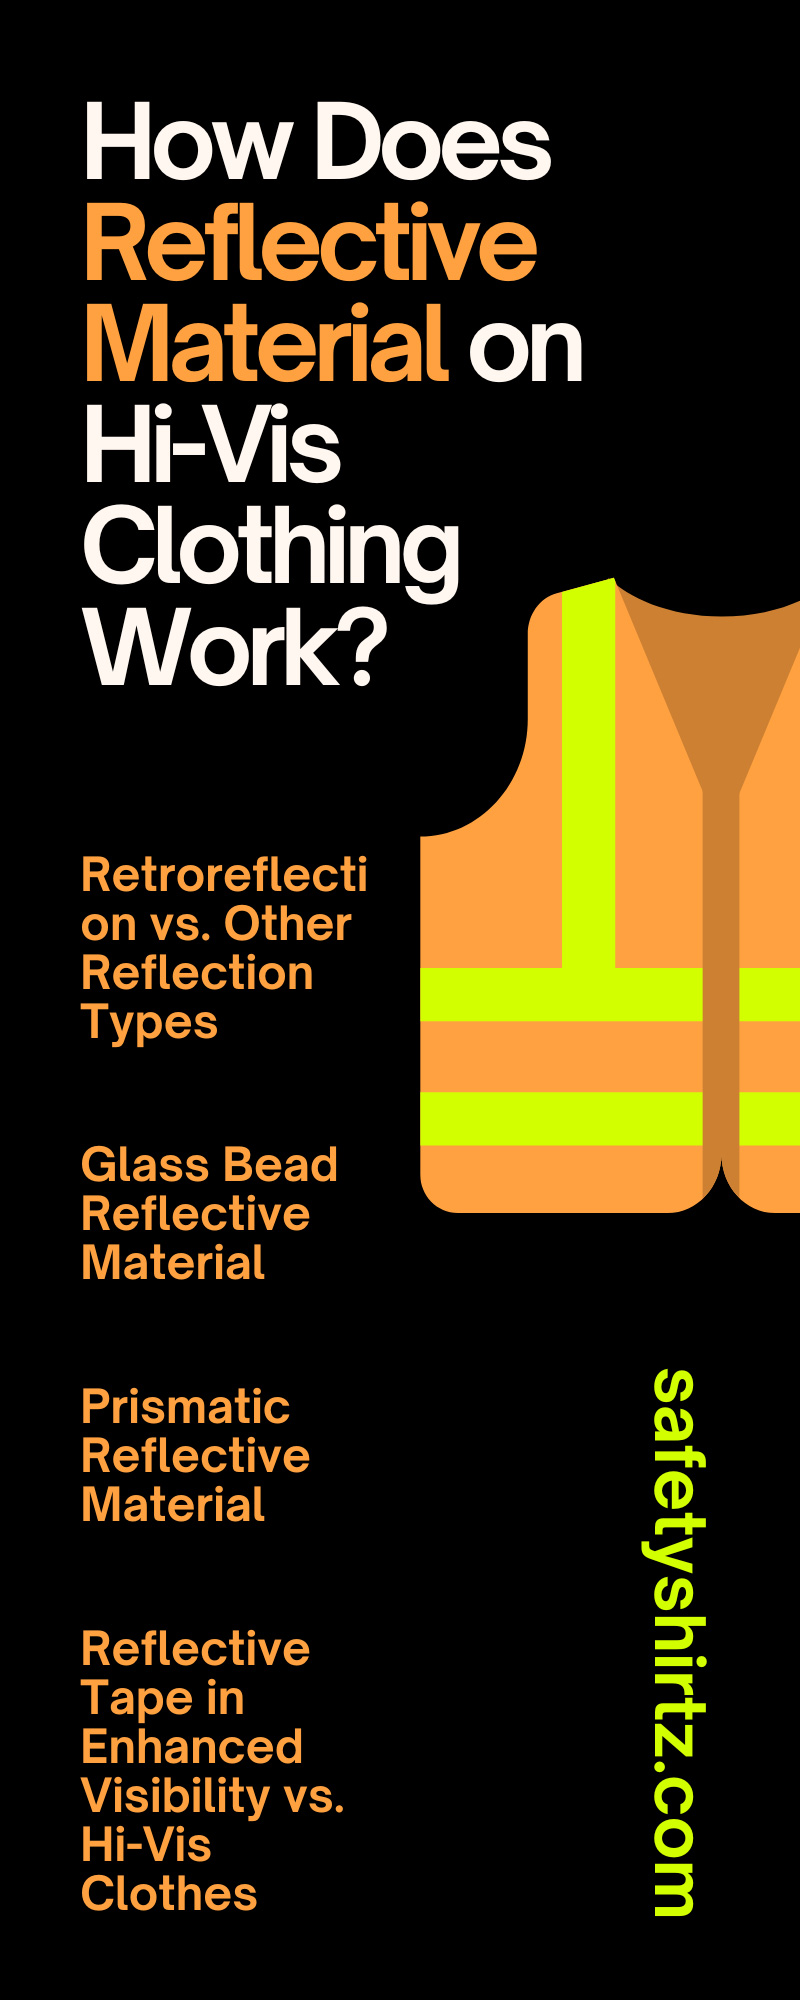 How Does Reflective Material on Hi-Vis Clothing Work?